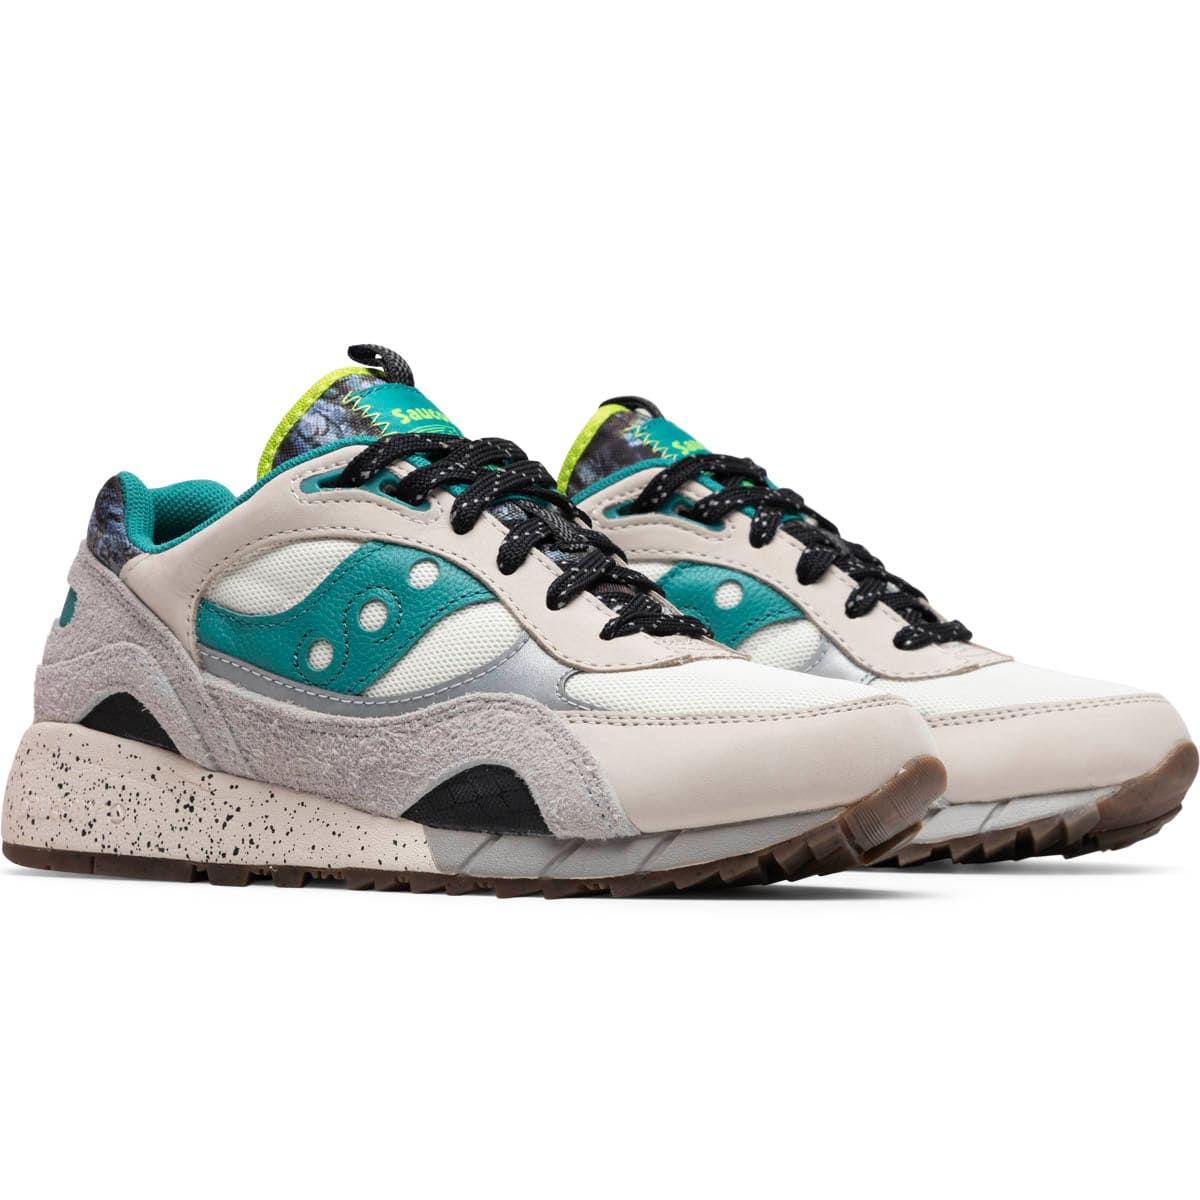 Saucony Shadow 6000 Men's Sneakers Lifestyle Running Shoes 